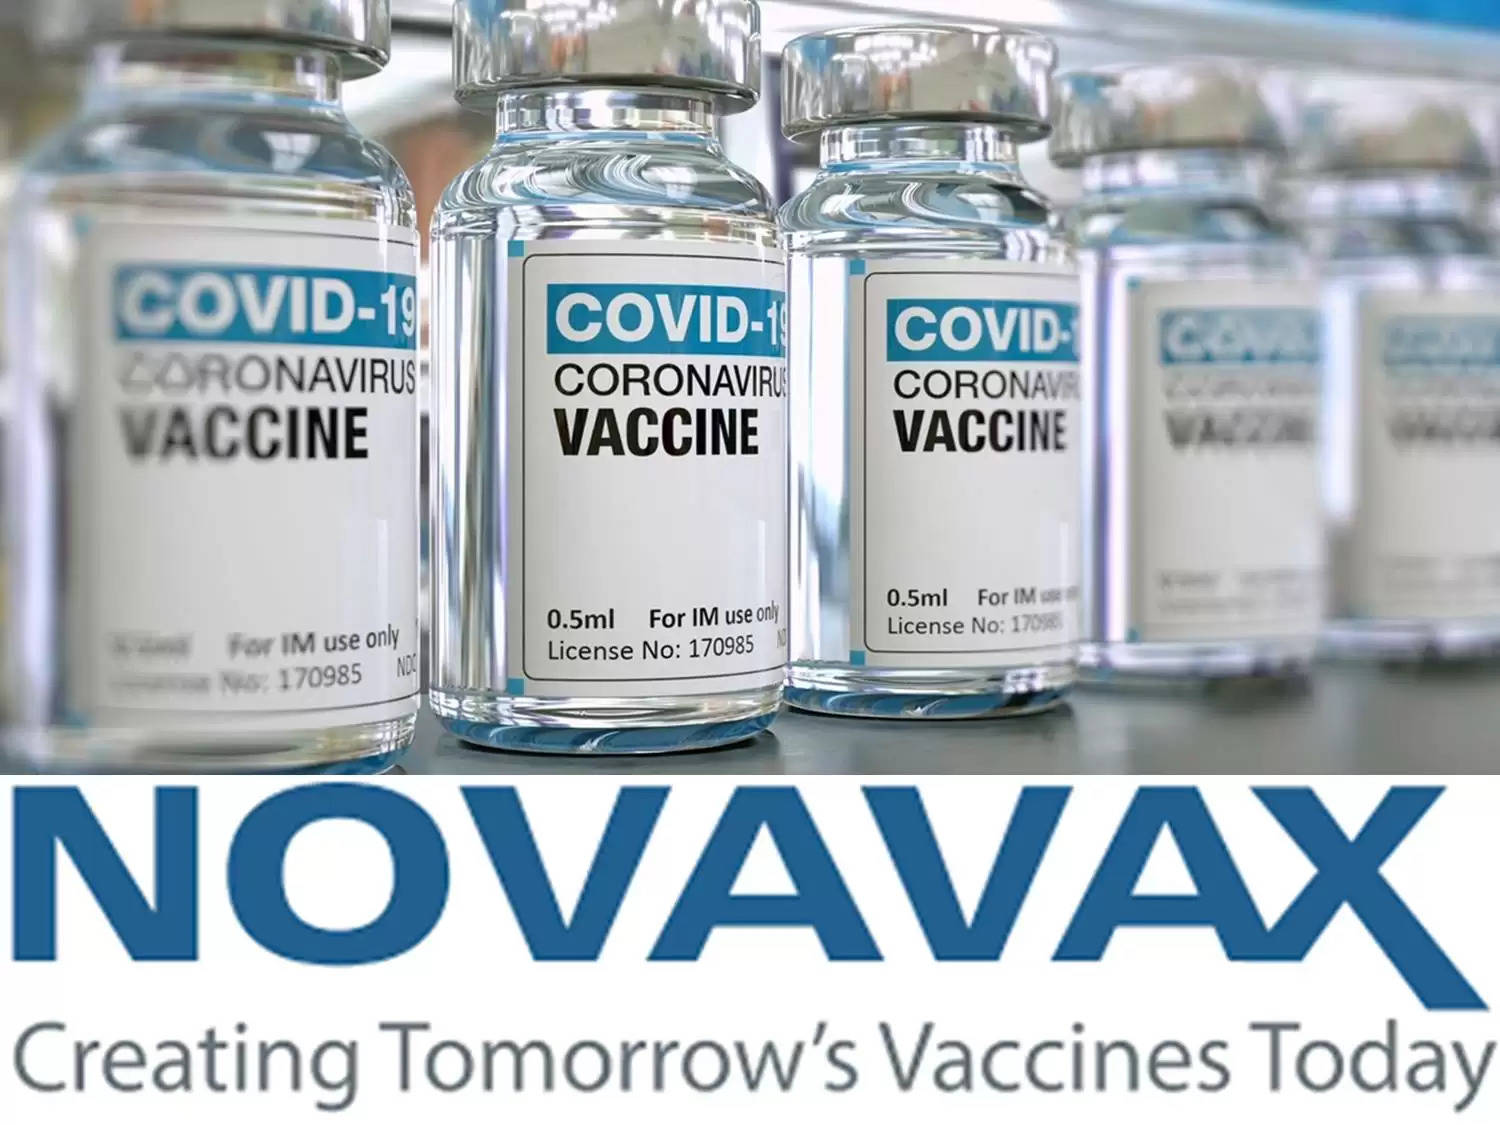 novovax serum institute efficacy what is novovax about vaccines in udaipur